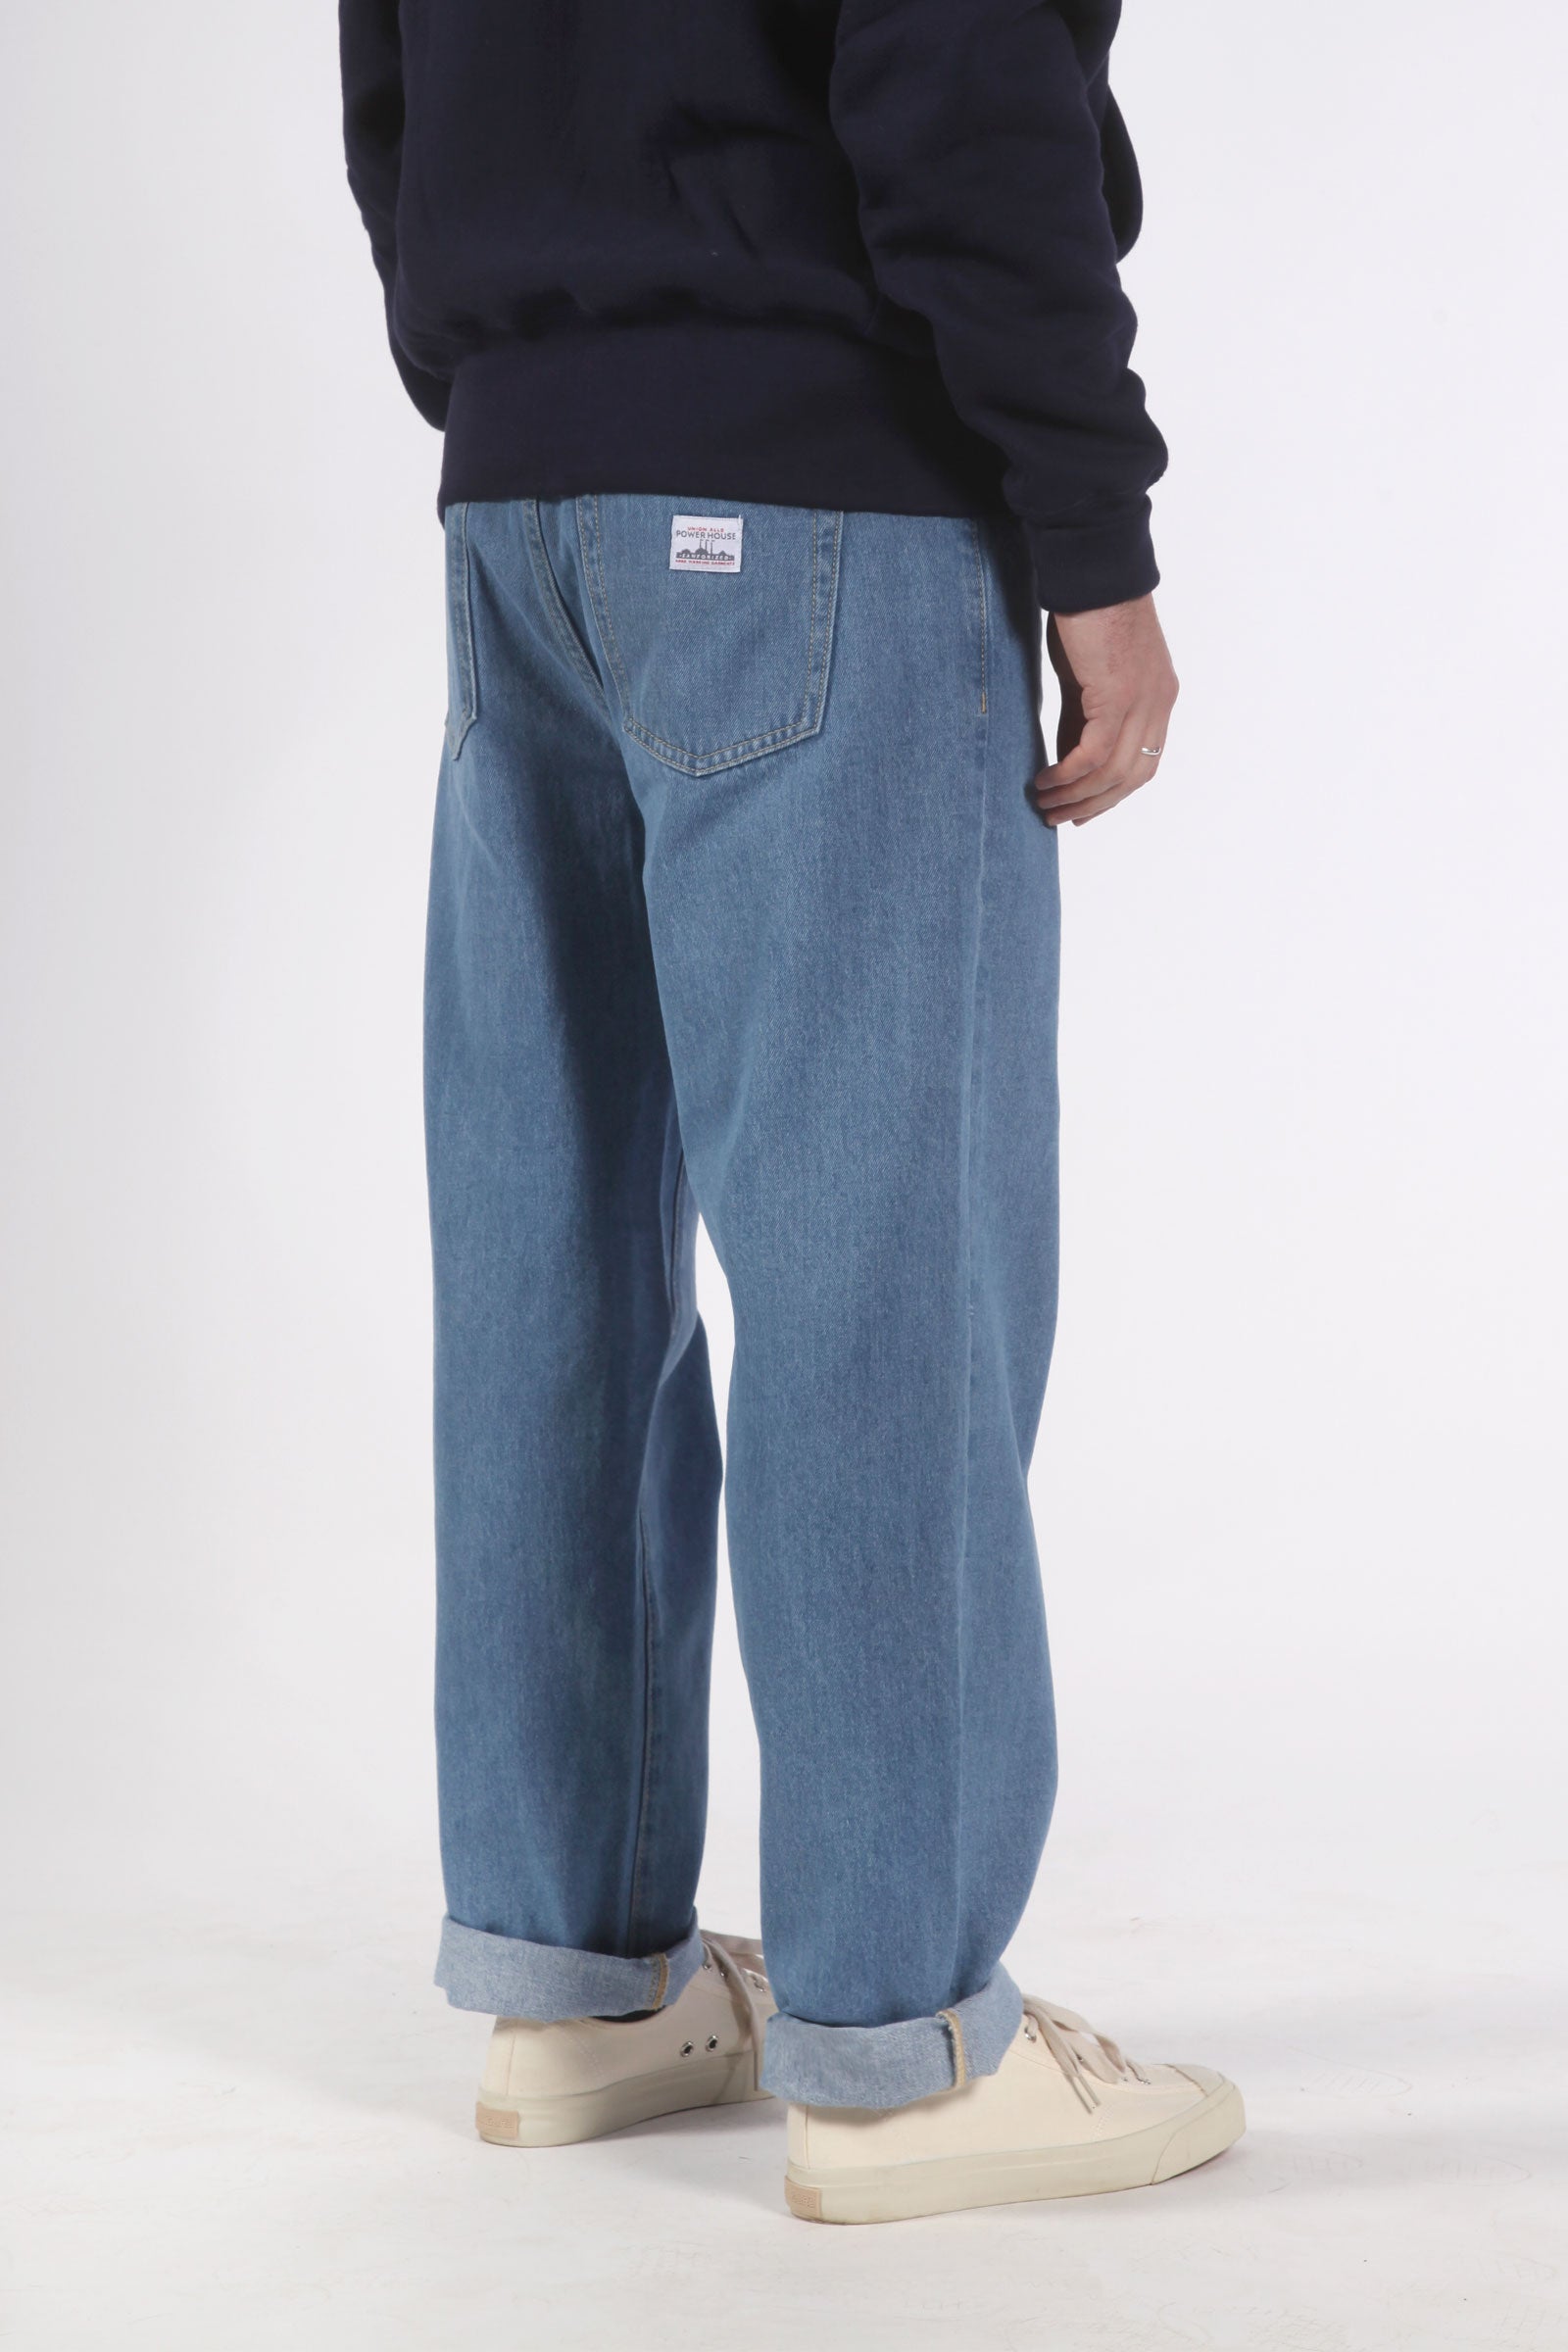 Power Goods - 90's Jeans - Washed Blue | Blacksmith Store